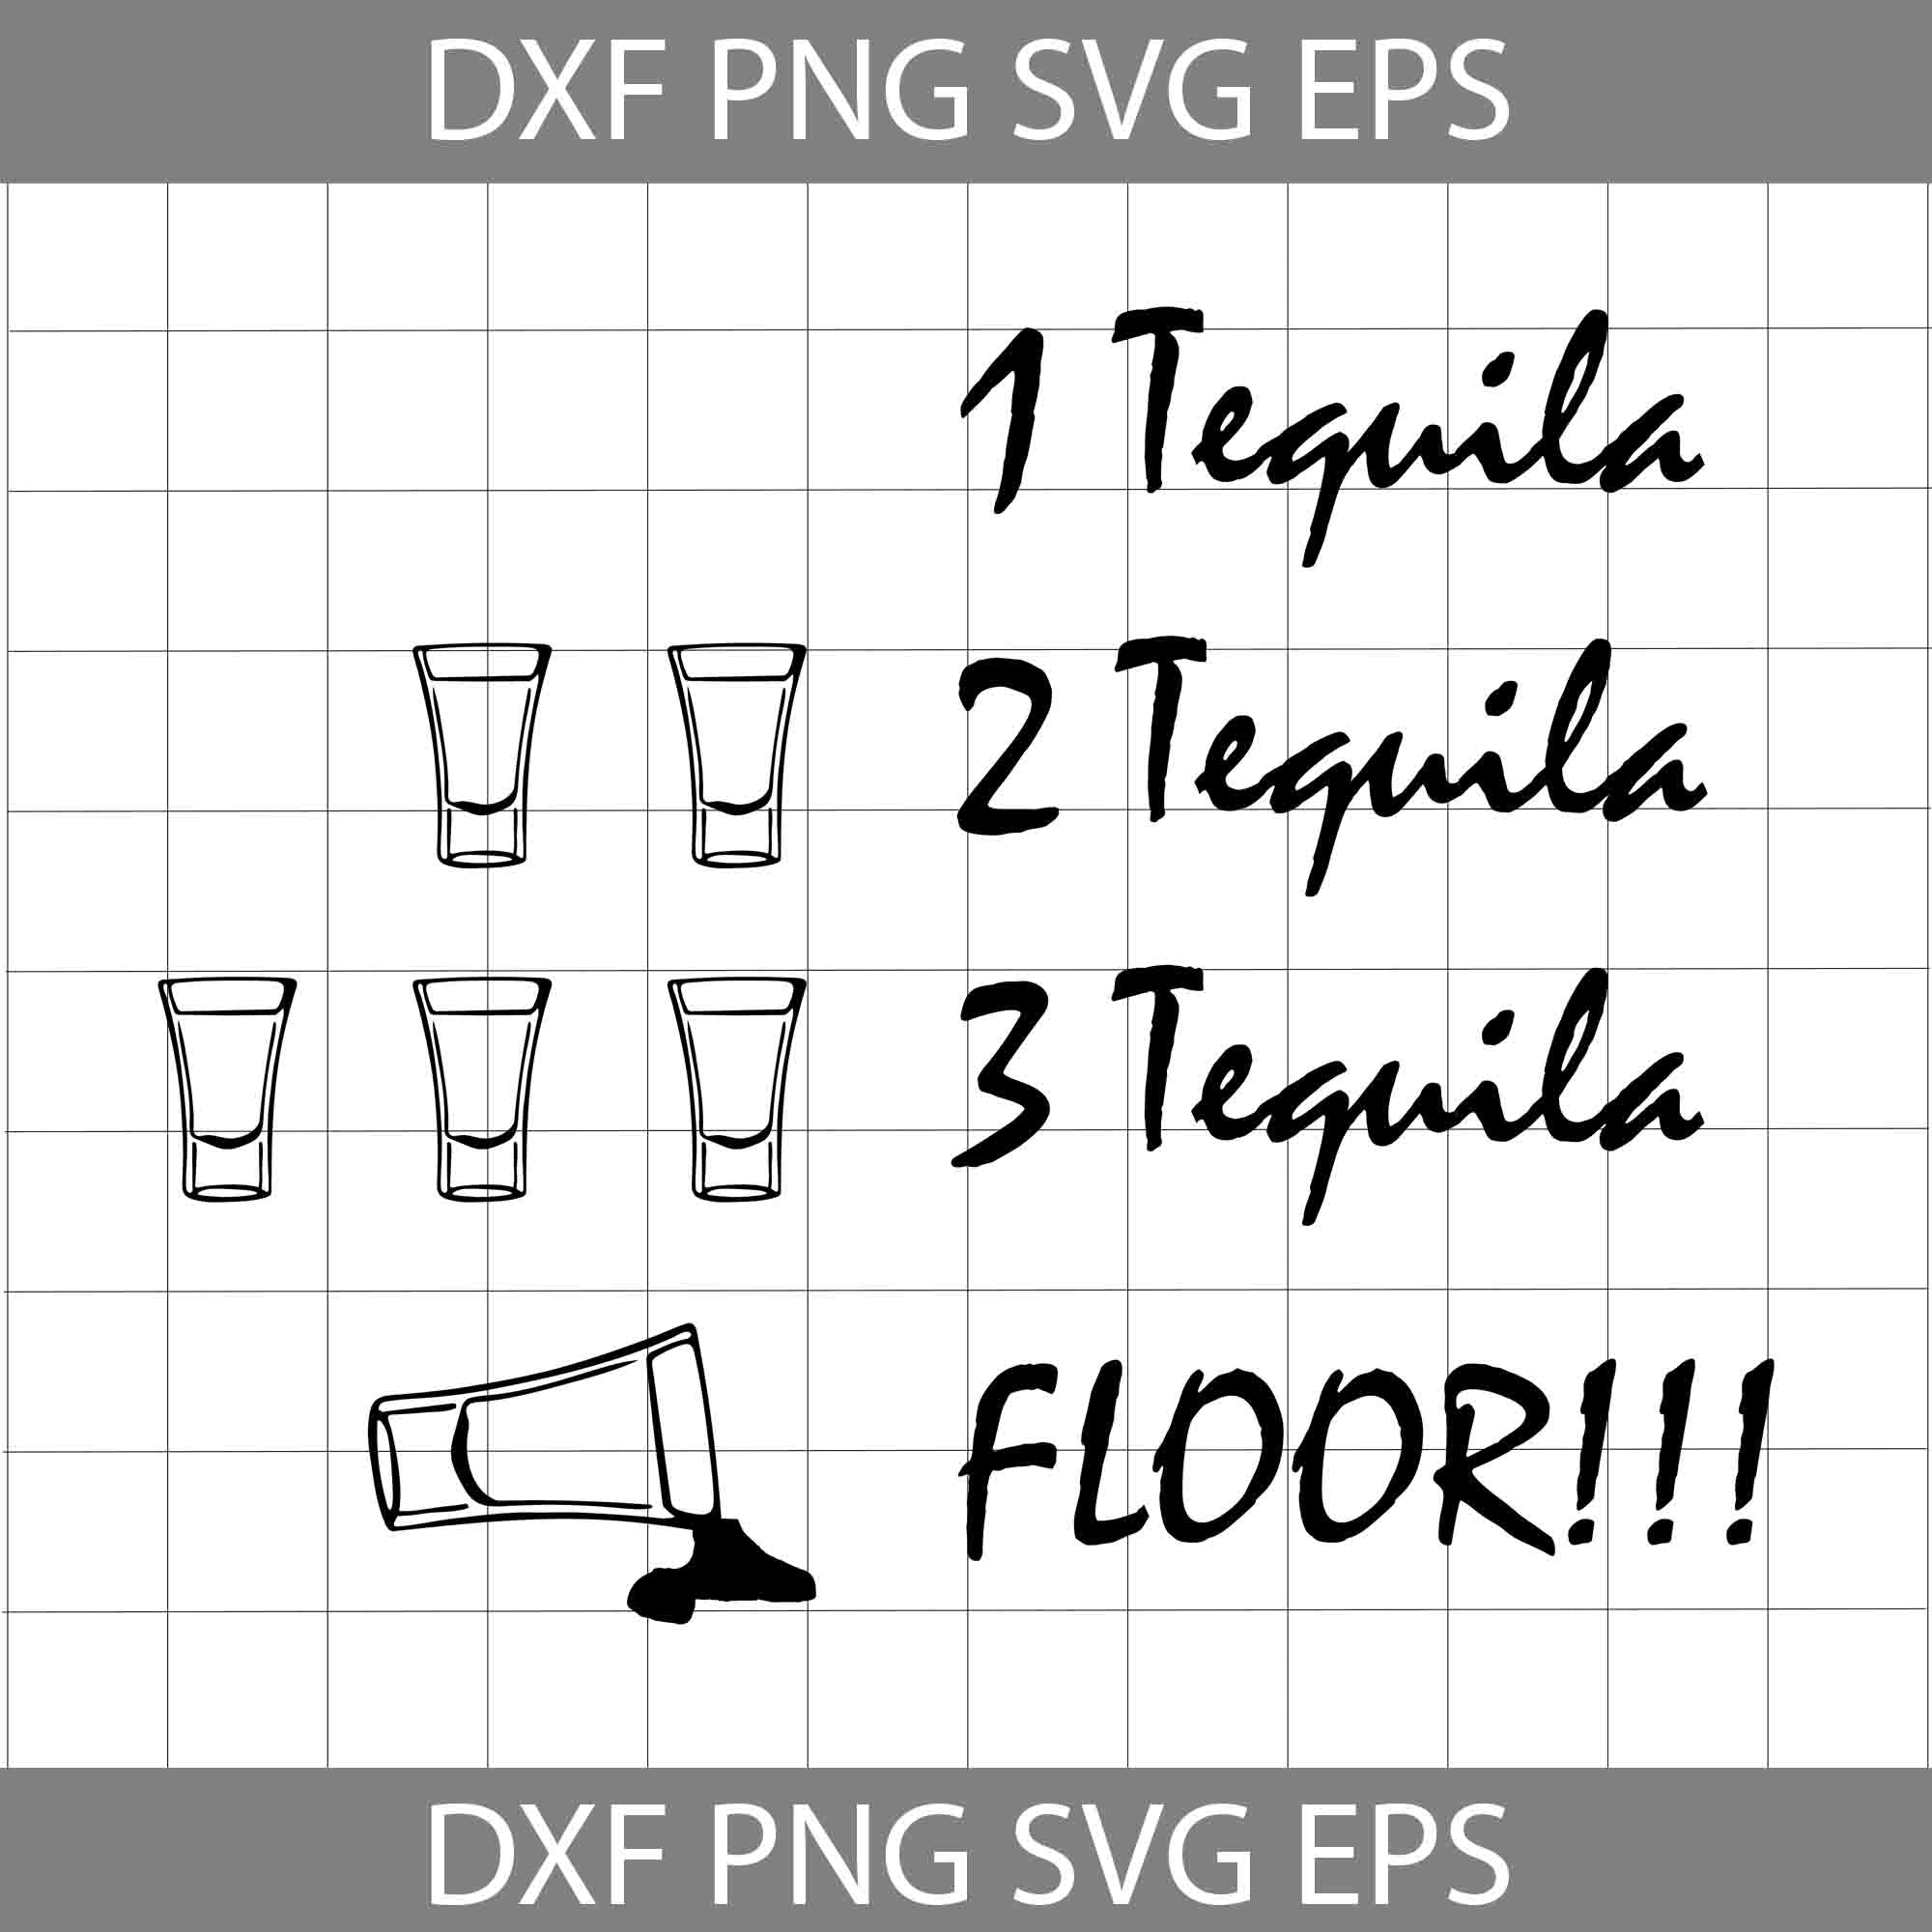 Tequila tequila tequila floor svg funny drinking svg cricut file clipart svg png eps dxf